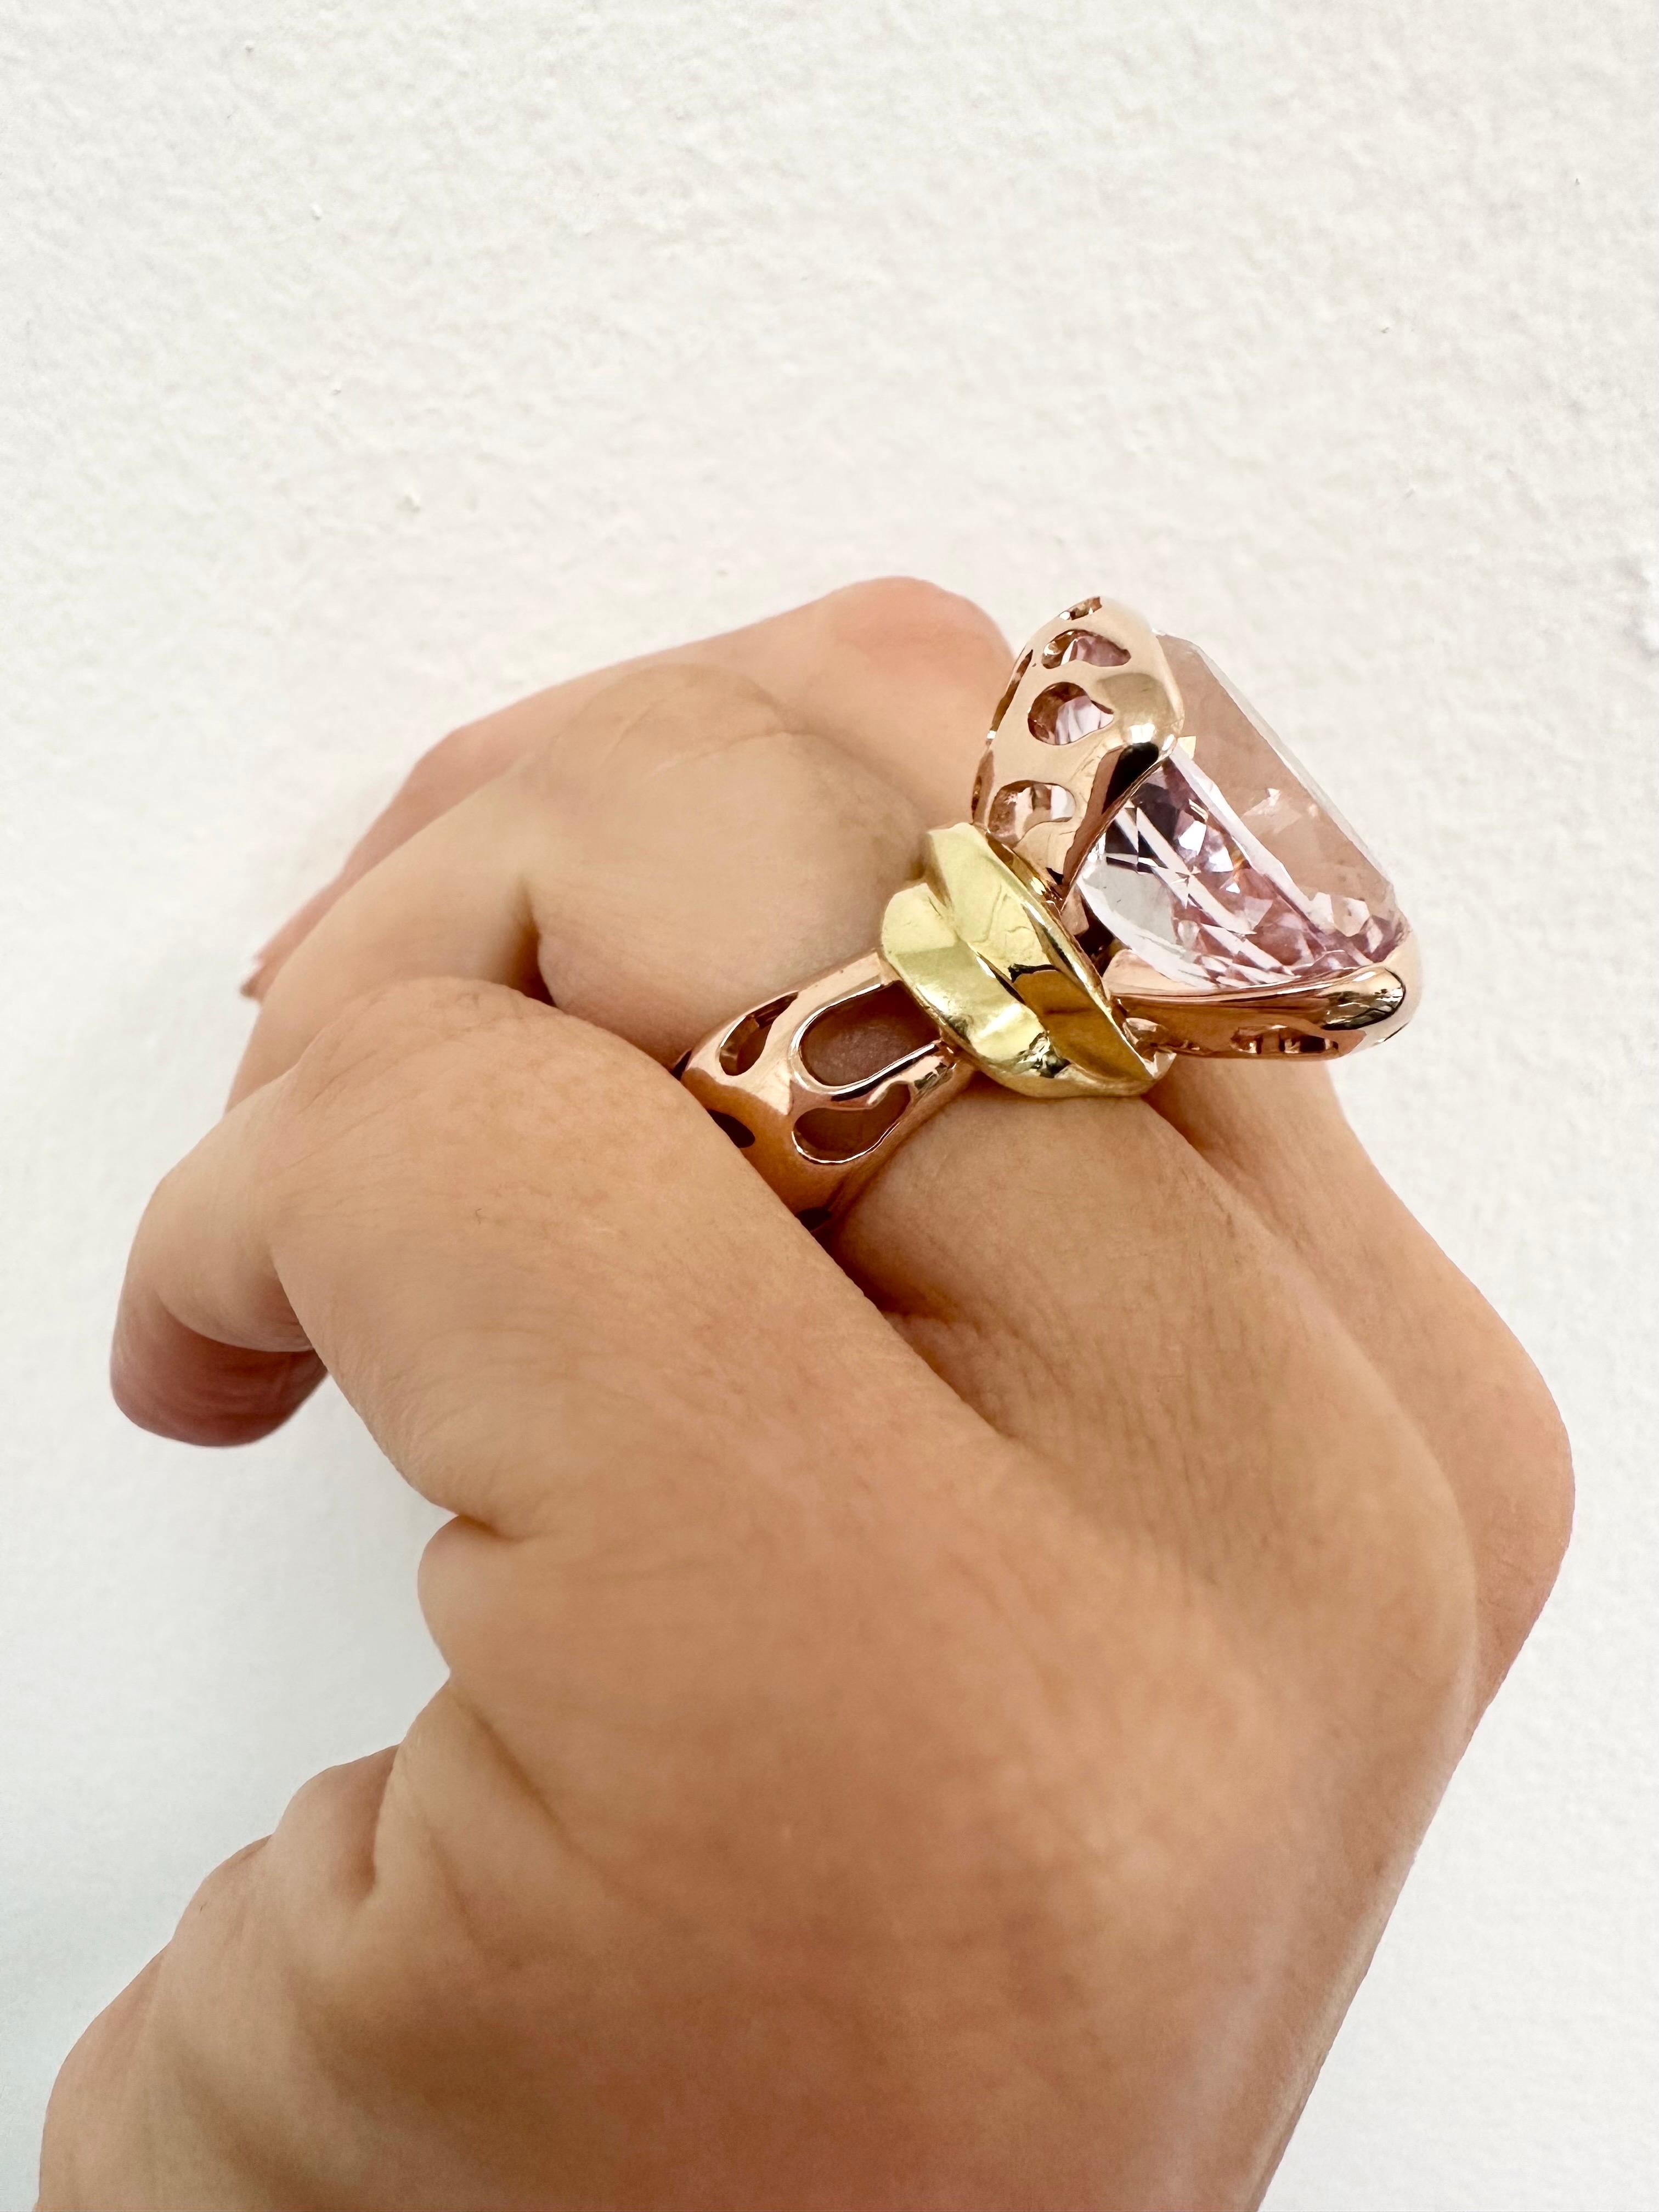 Beautiful cocktail ring with natural pink kunzite in 14KT rose and 18KT yellow gold. Very rare handcrafted piece! It feels as if the designer wanted to make the ring feathery with almost uncovering the center stones beauty from a scarf.

Metal Type: